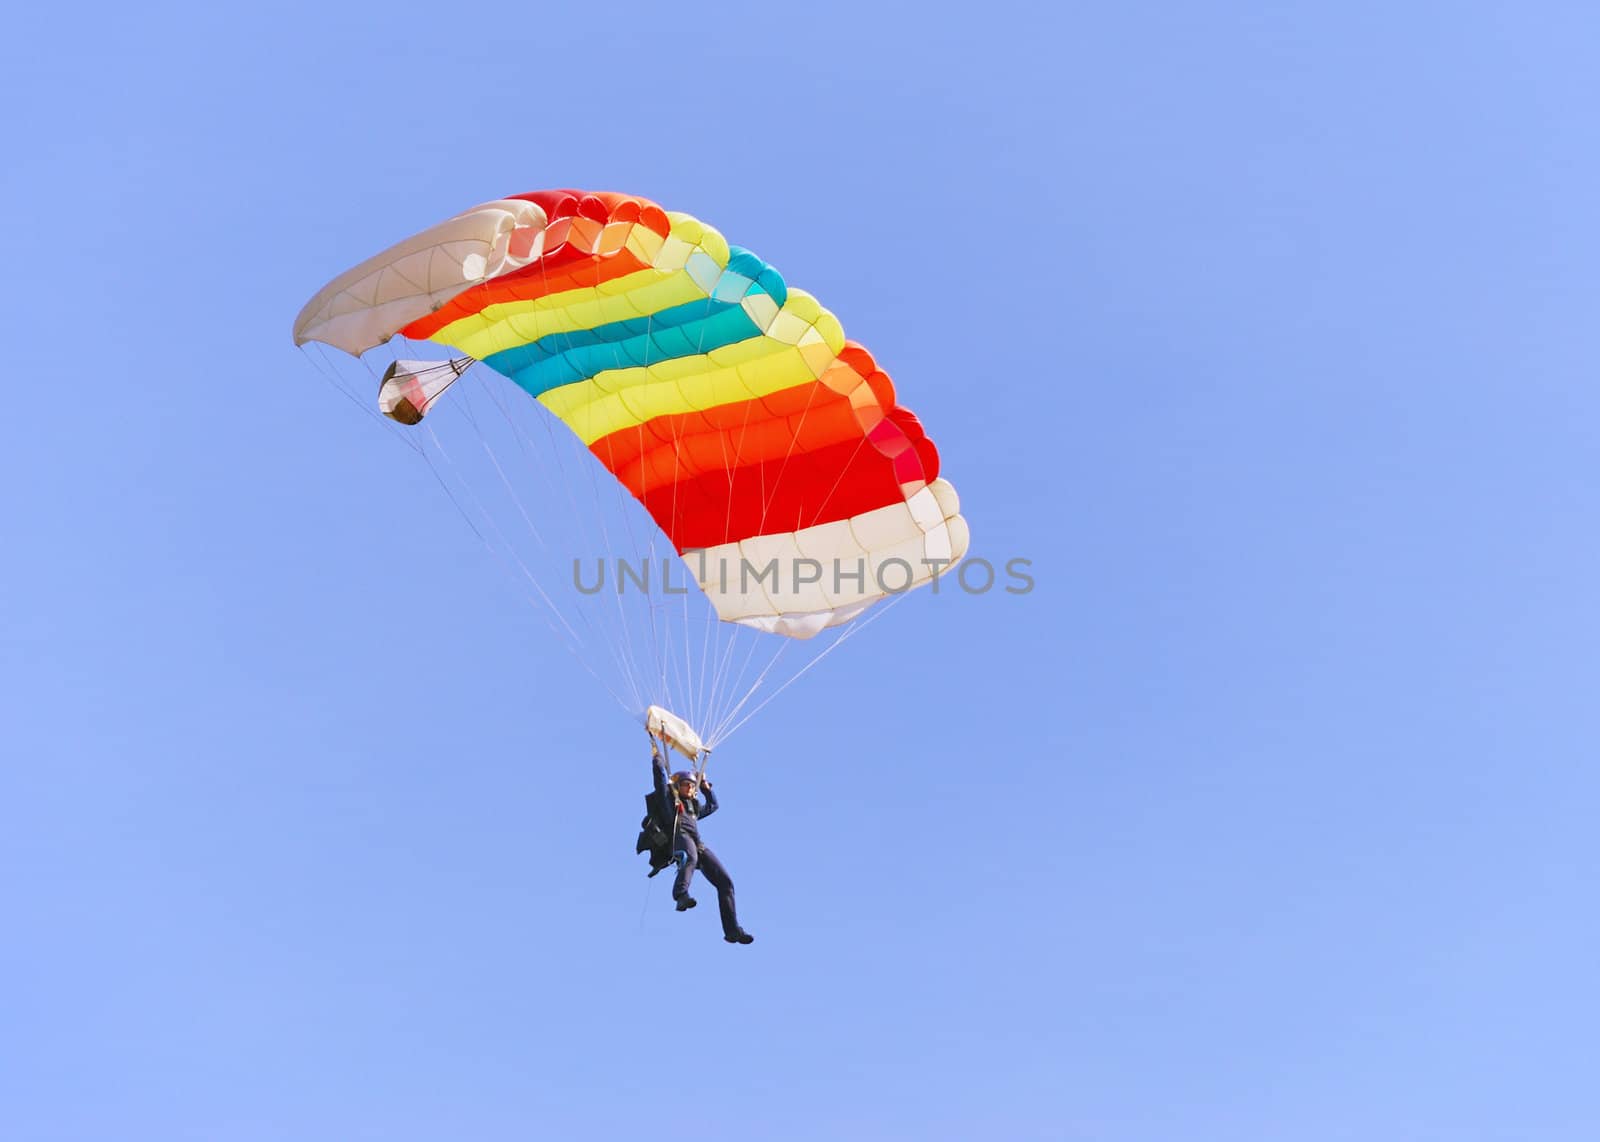 Colorful parachute against clear sky in background.